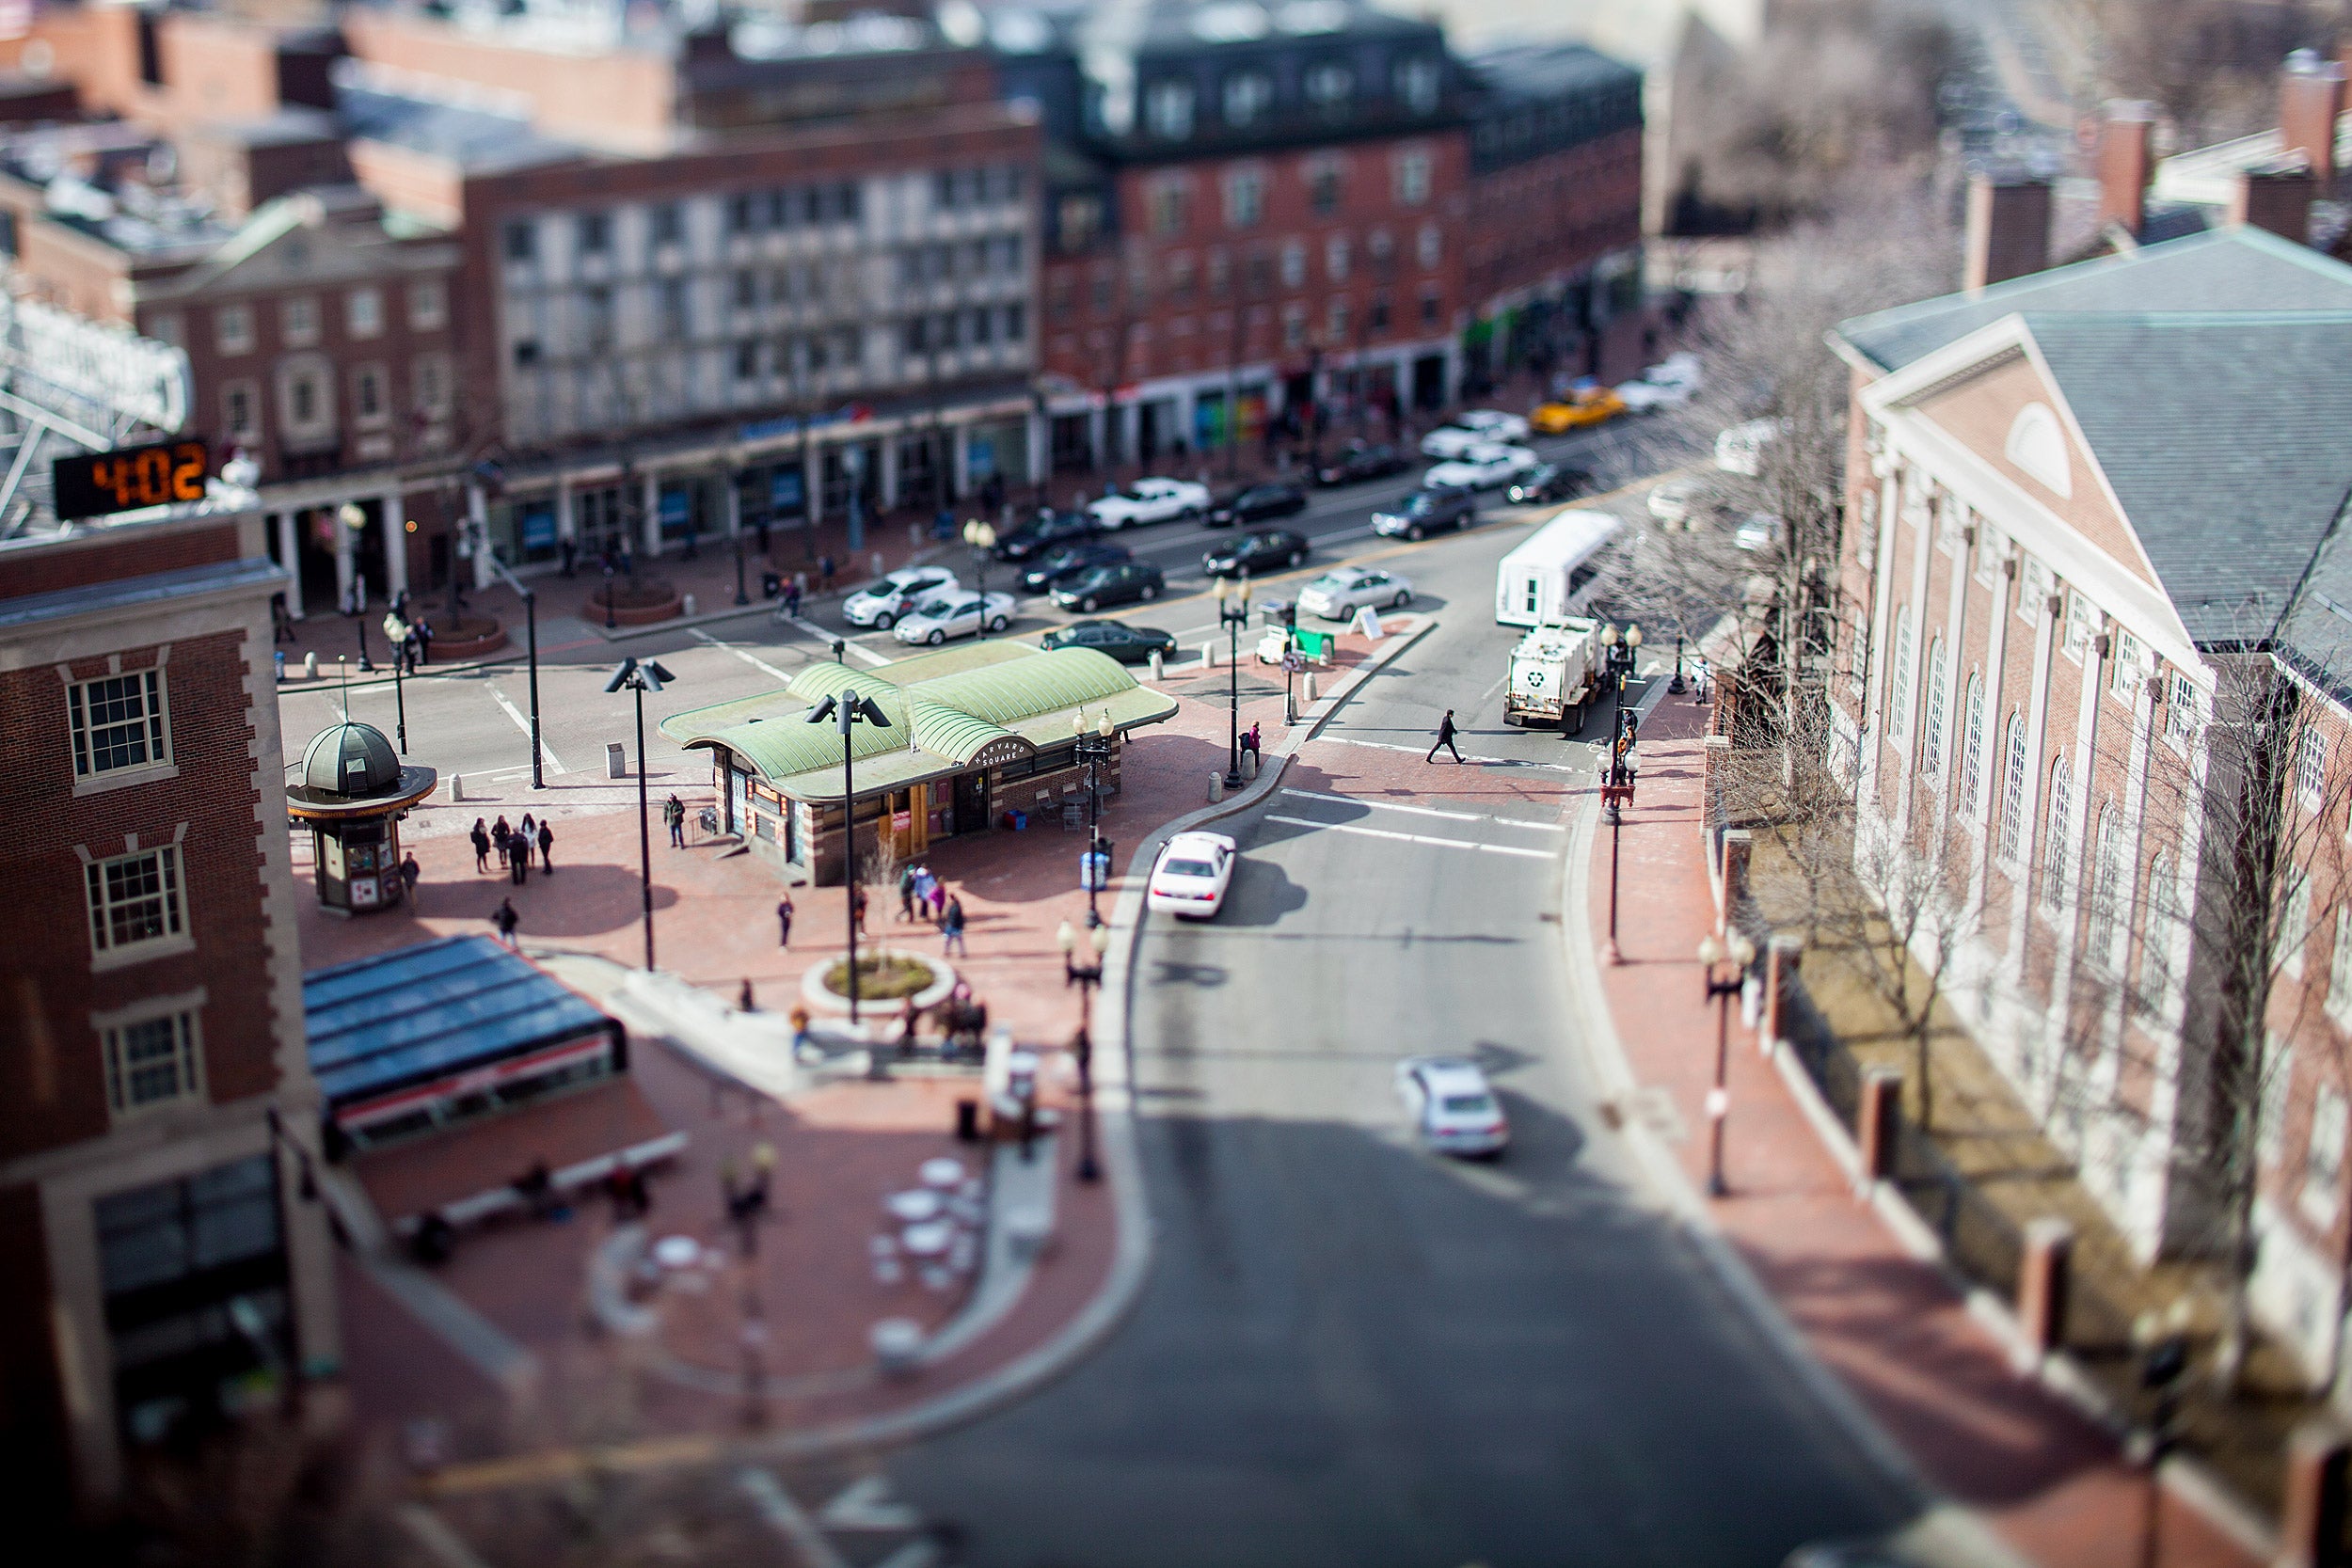 Harvard square as seen from above